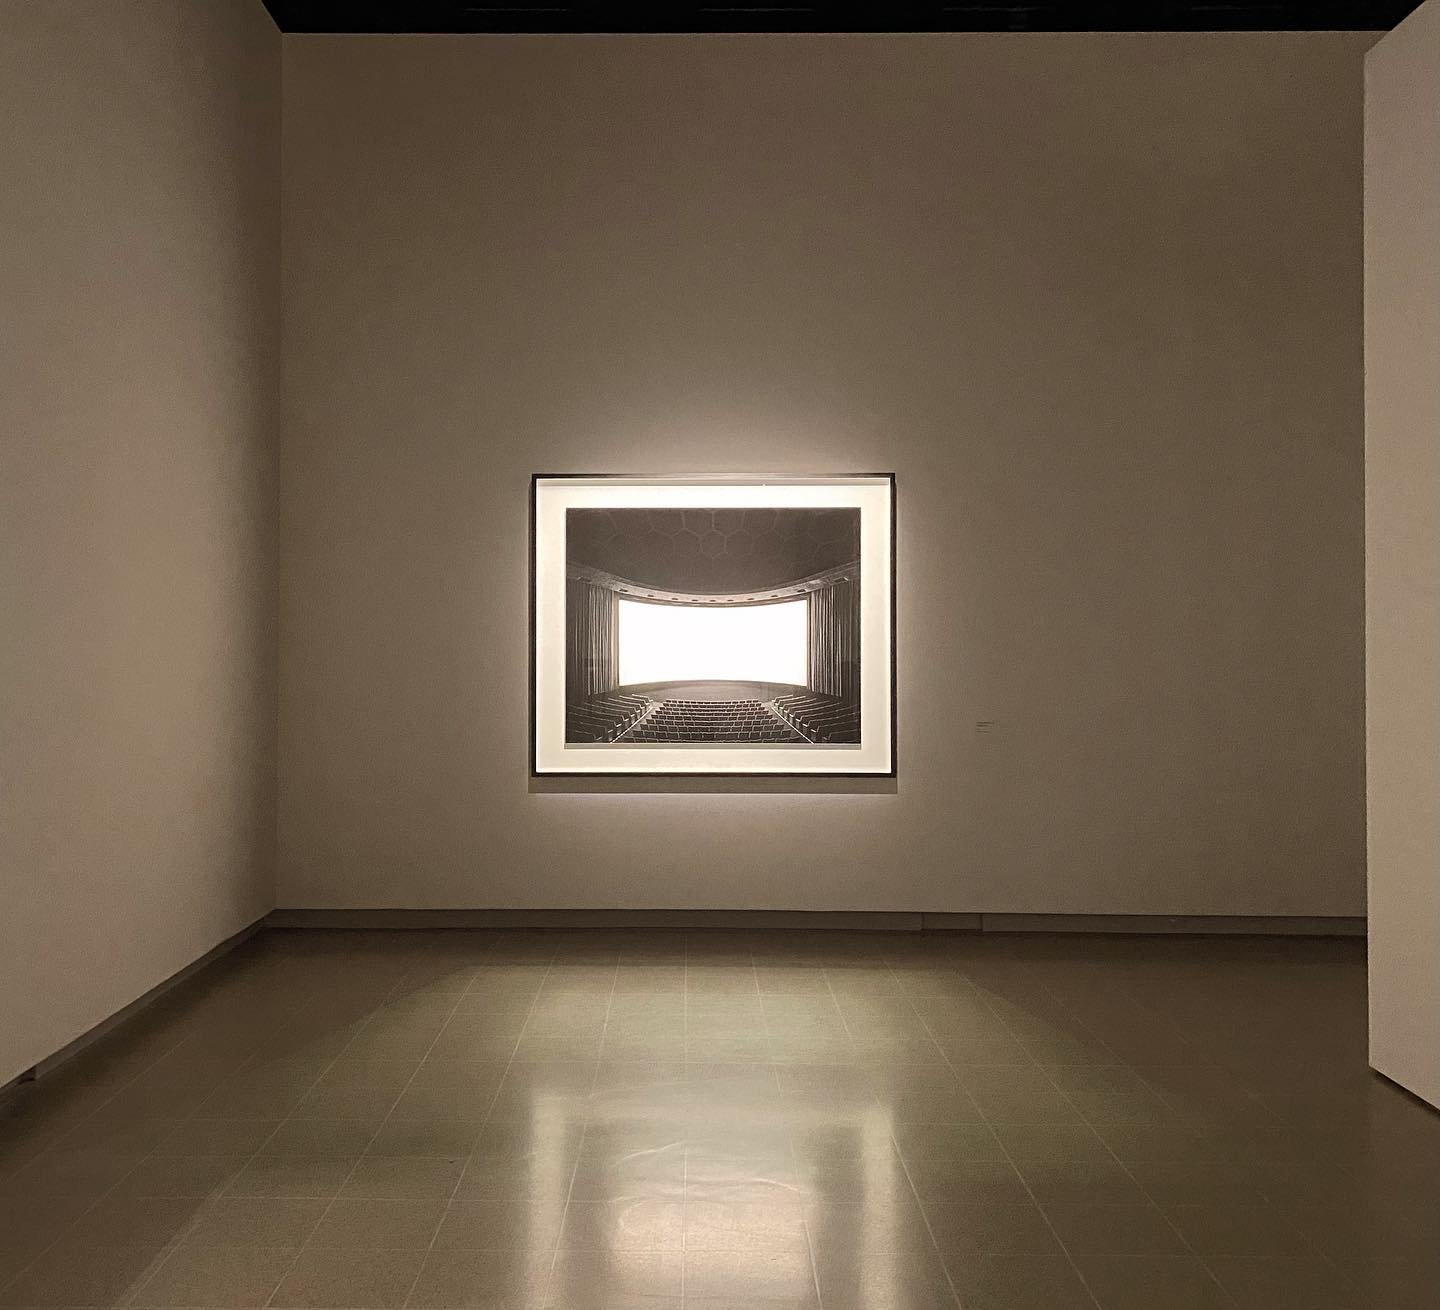 https://www.southbankcentre.co.uk/whats-on/art-exhibitions/hiroshi-sugimoto